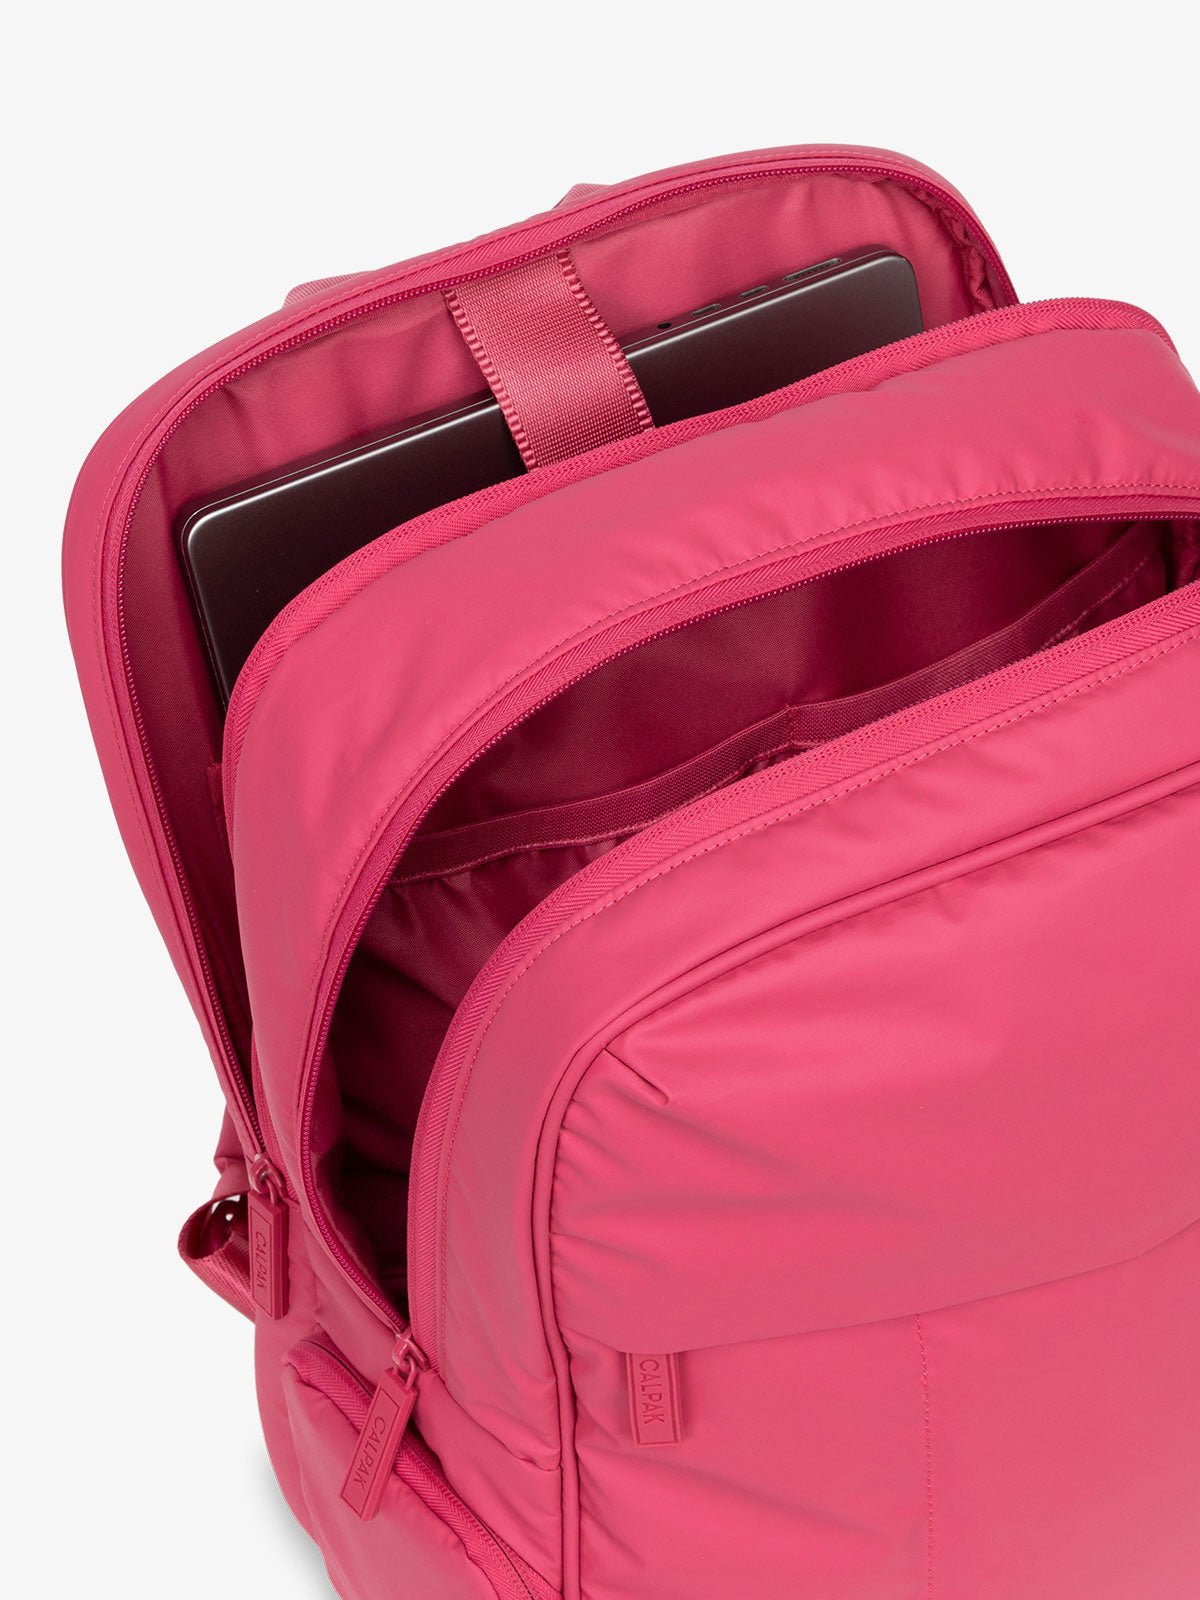 CALPAK Luka 15 Inch Laptop Backpack with soft puffy exterior and multiple pockets in pink